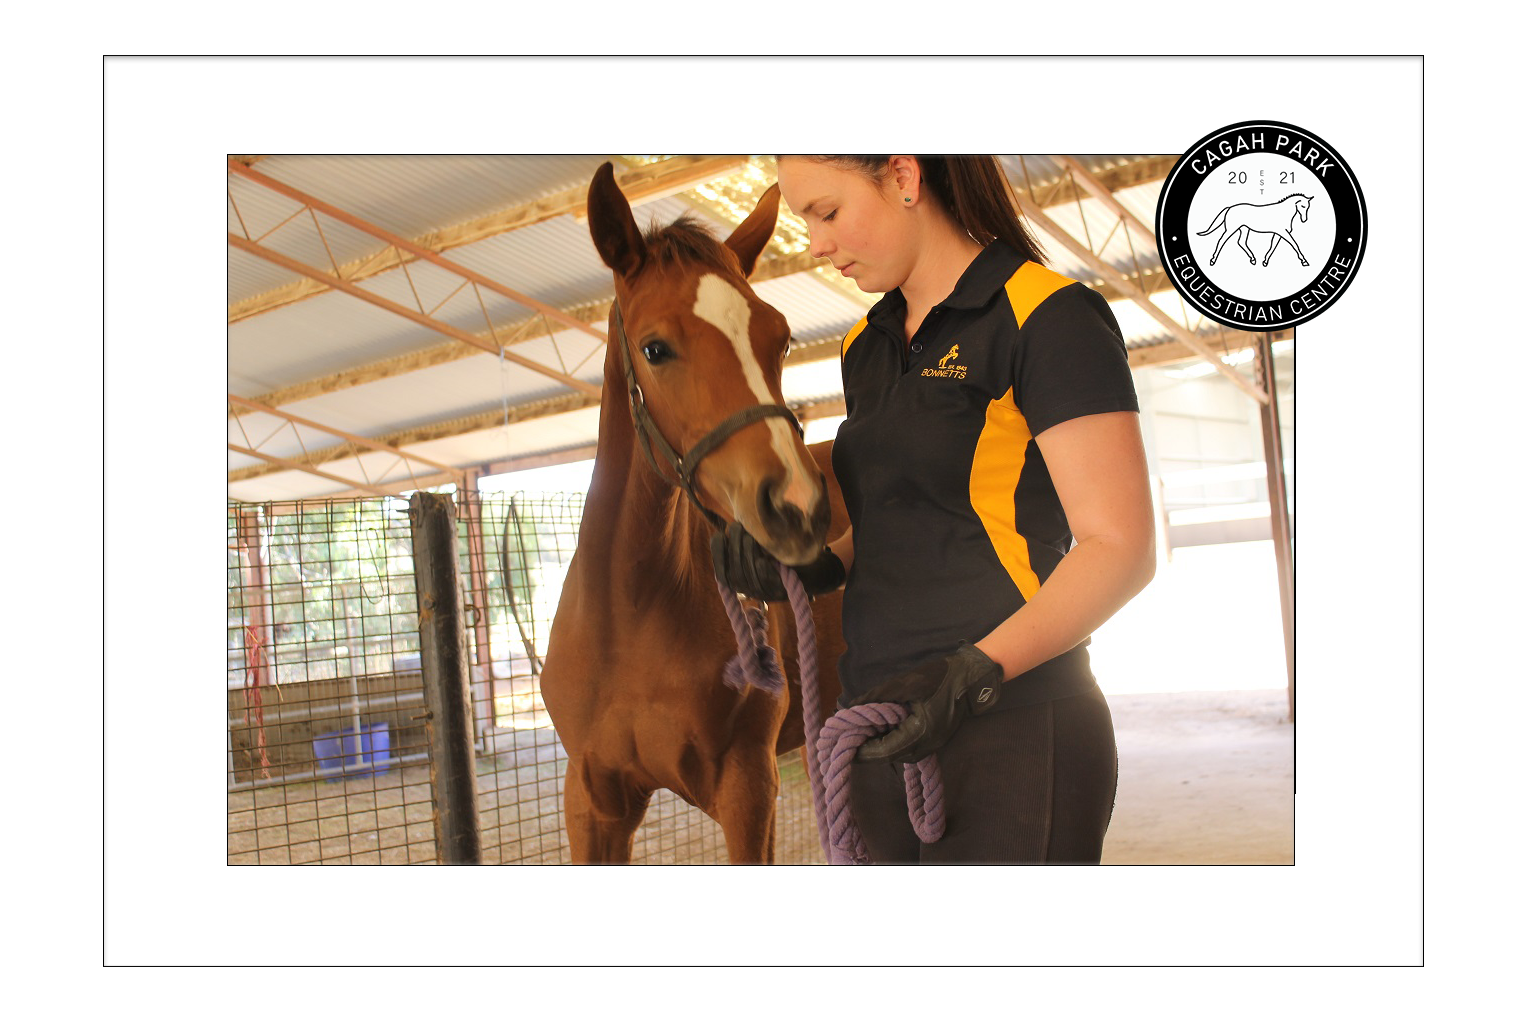 Cagah Park Equestrian Centre - Caitlin Howship provides quality horse riding lessons 